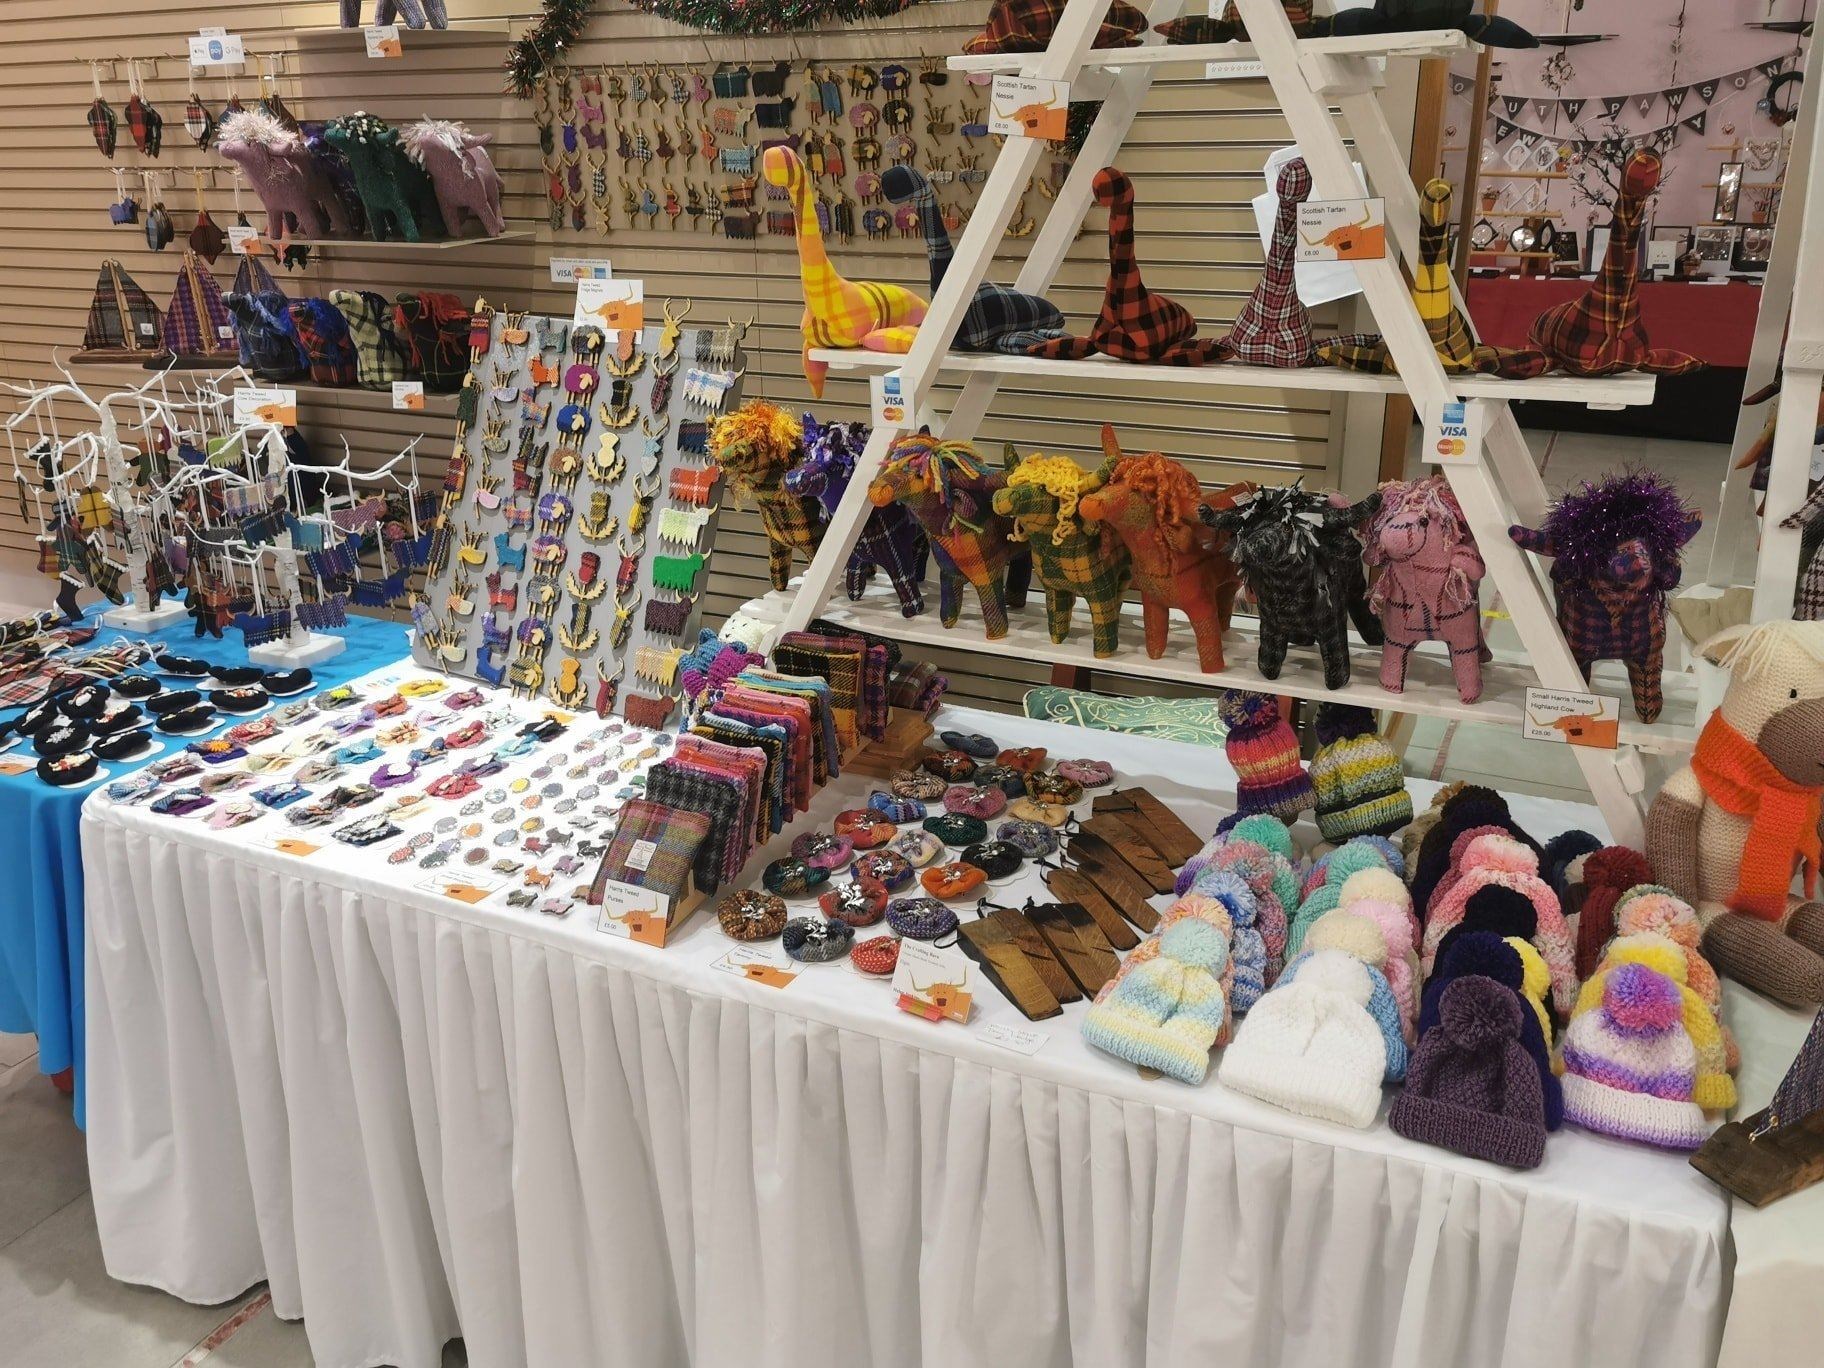 Just some of the crafts available at the fair.